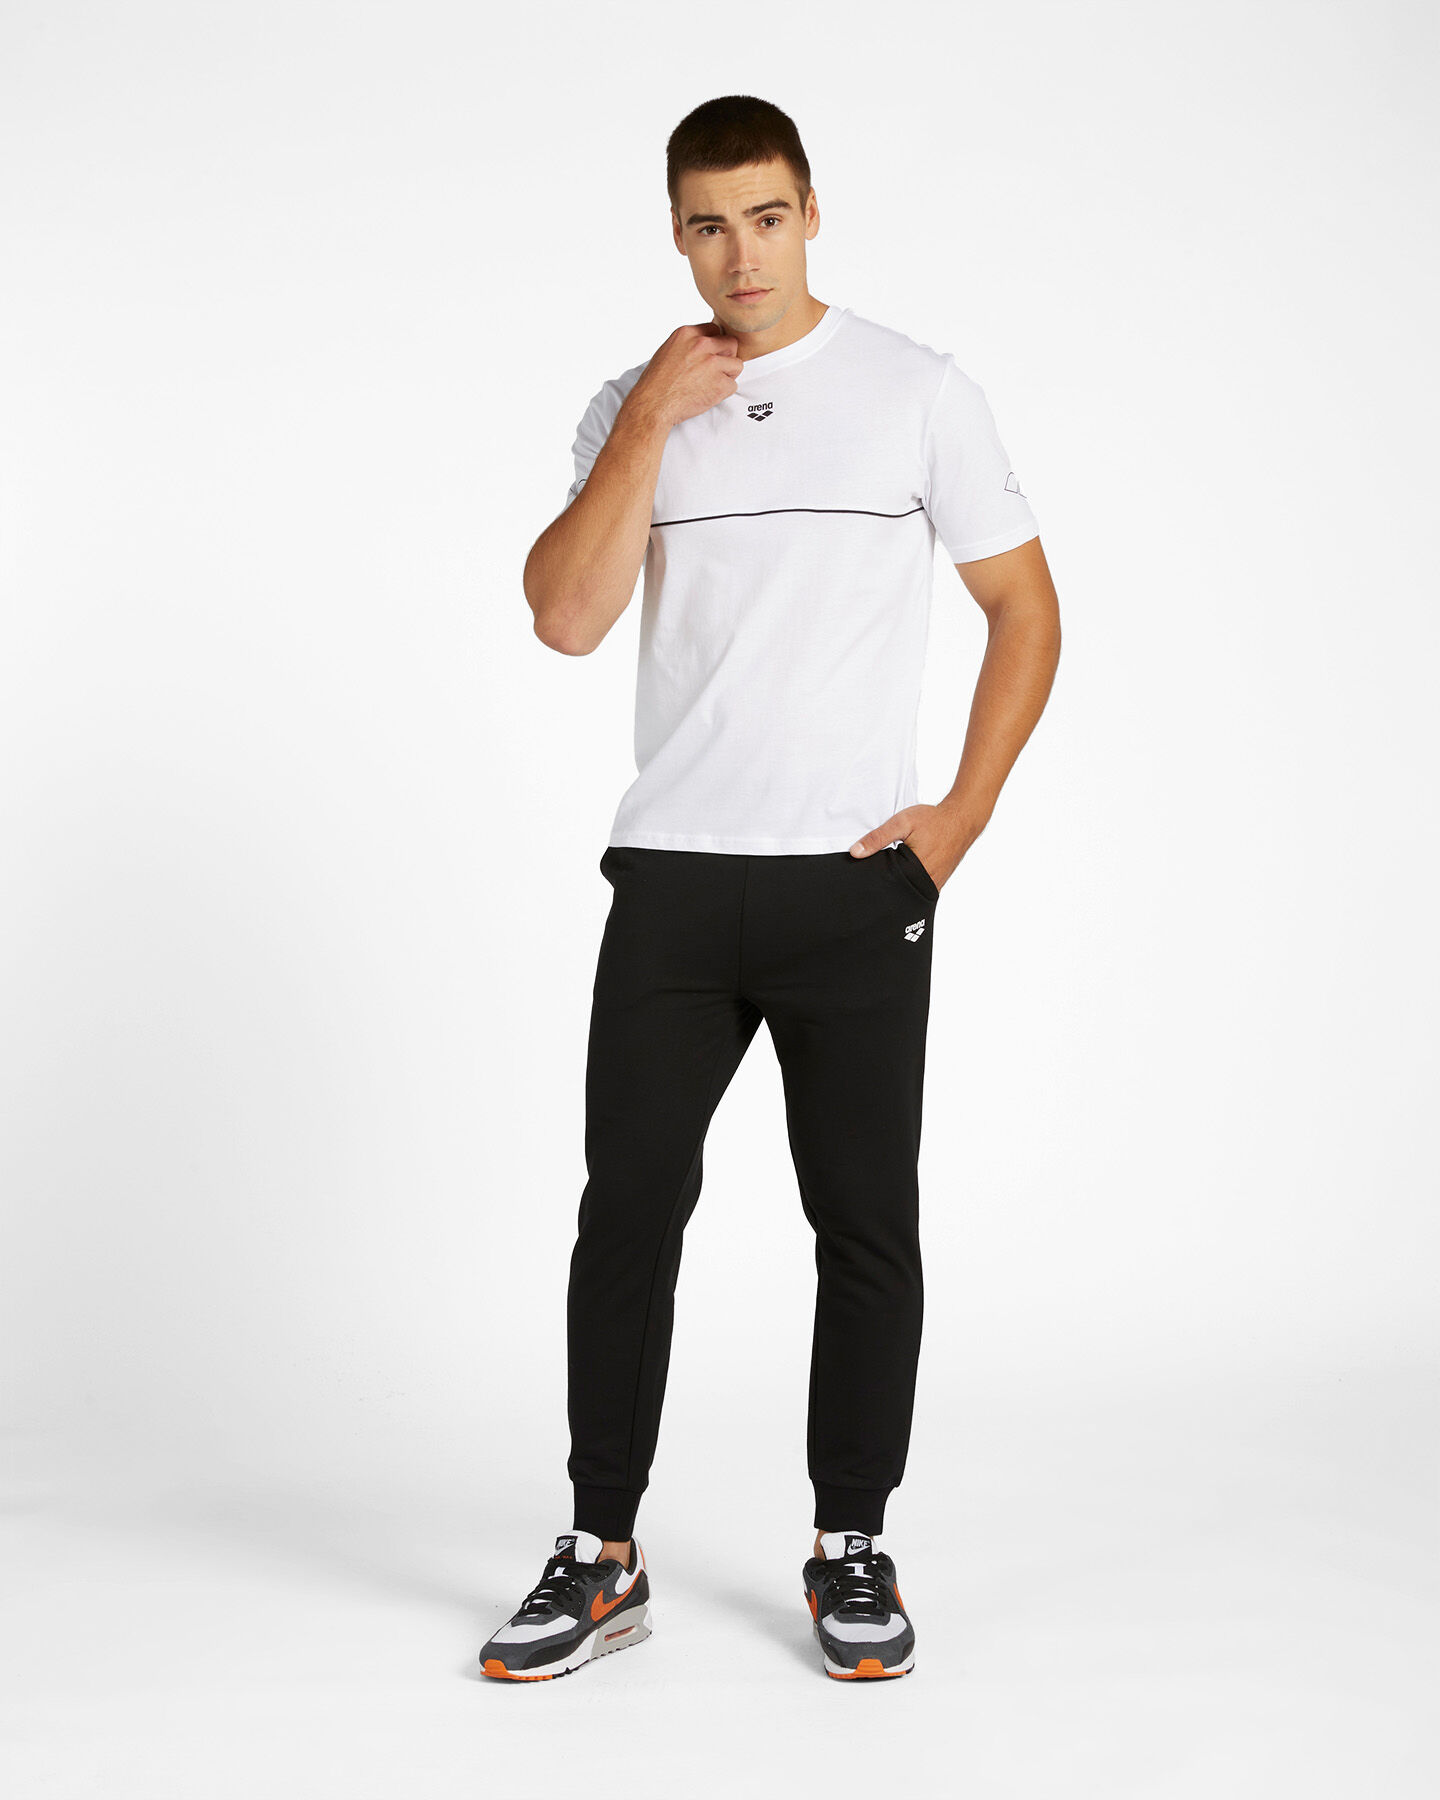  T-Shirt ARENA CLASSIC SPORT M S4105828|001|S scatto 1